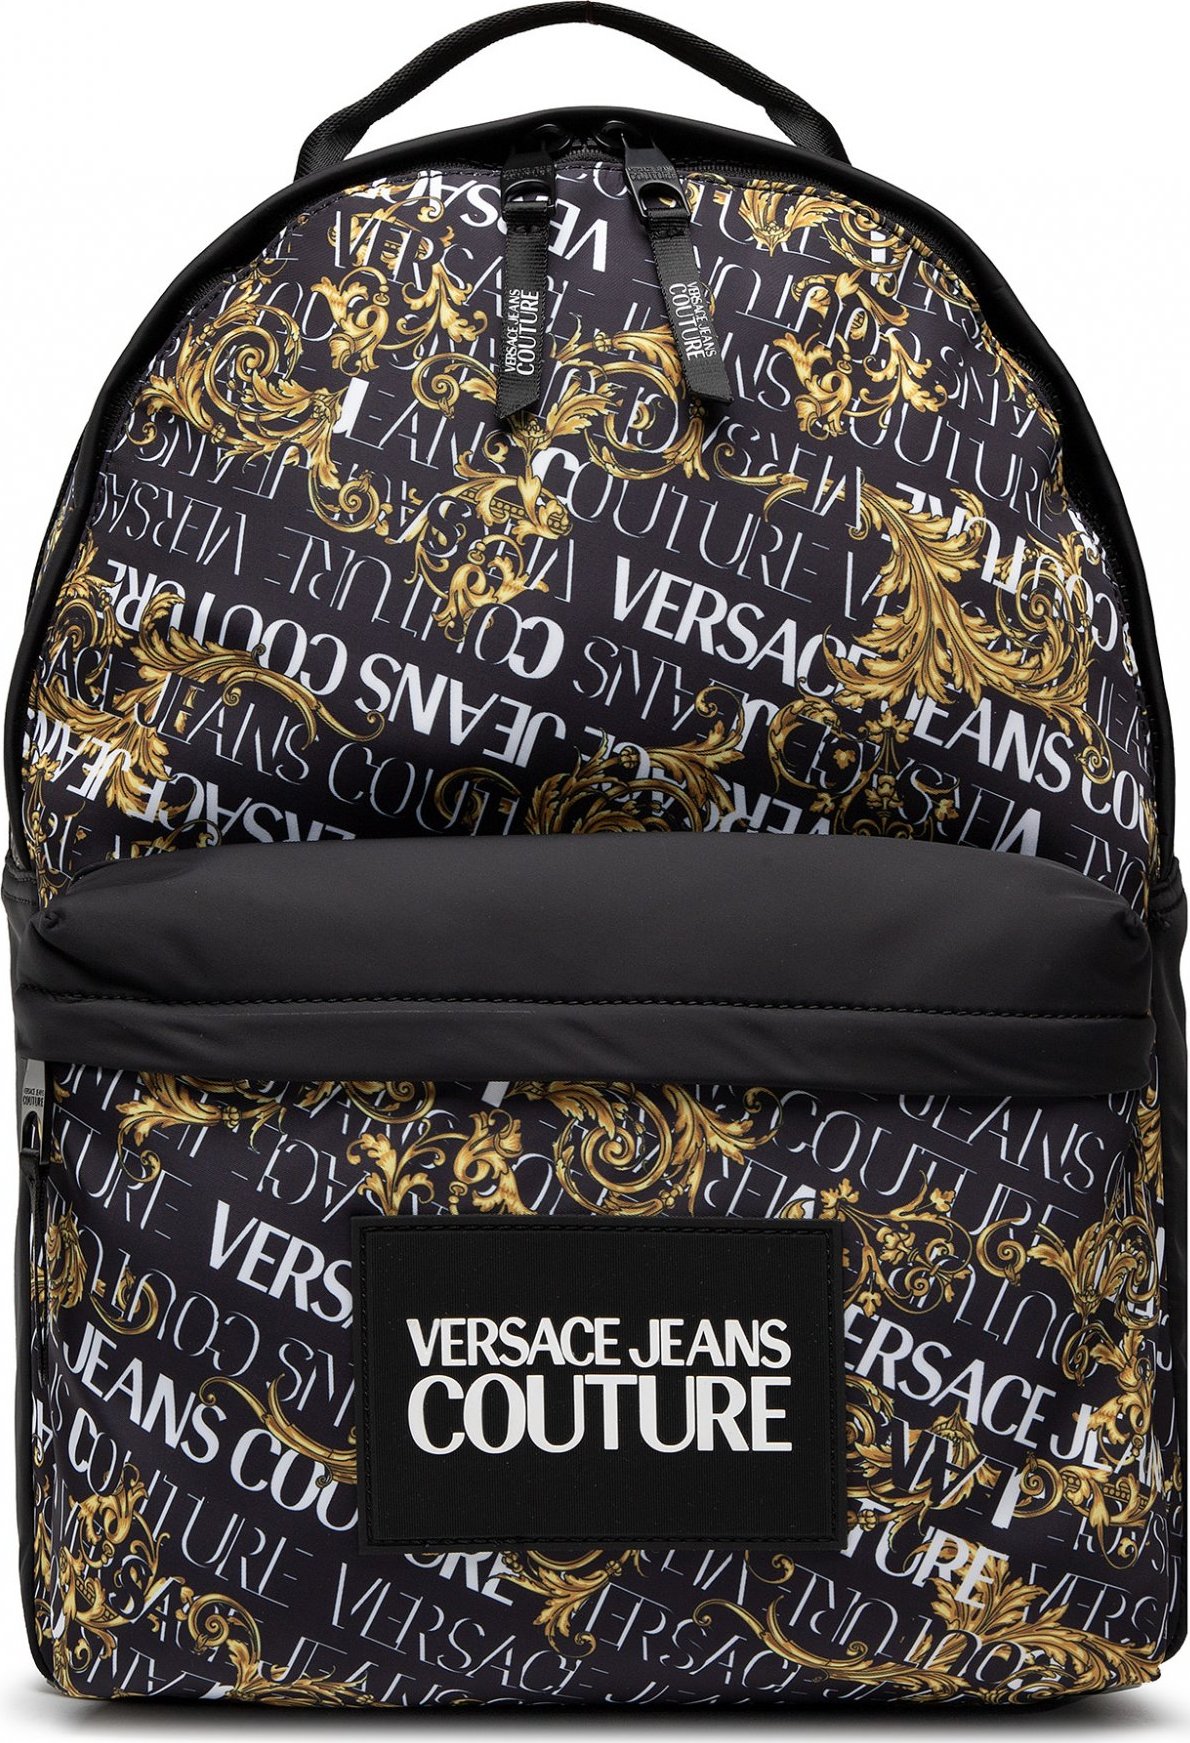 Versace Jeans Couture 73YA4BF1